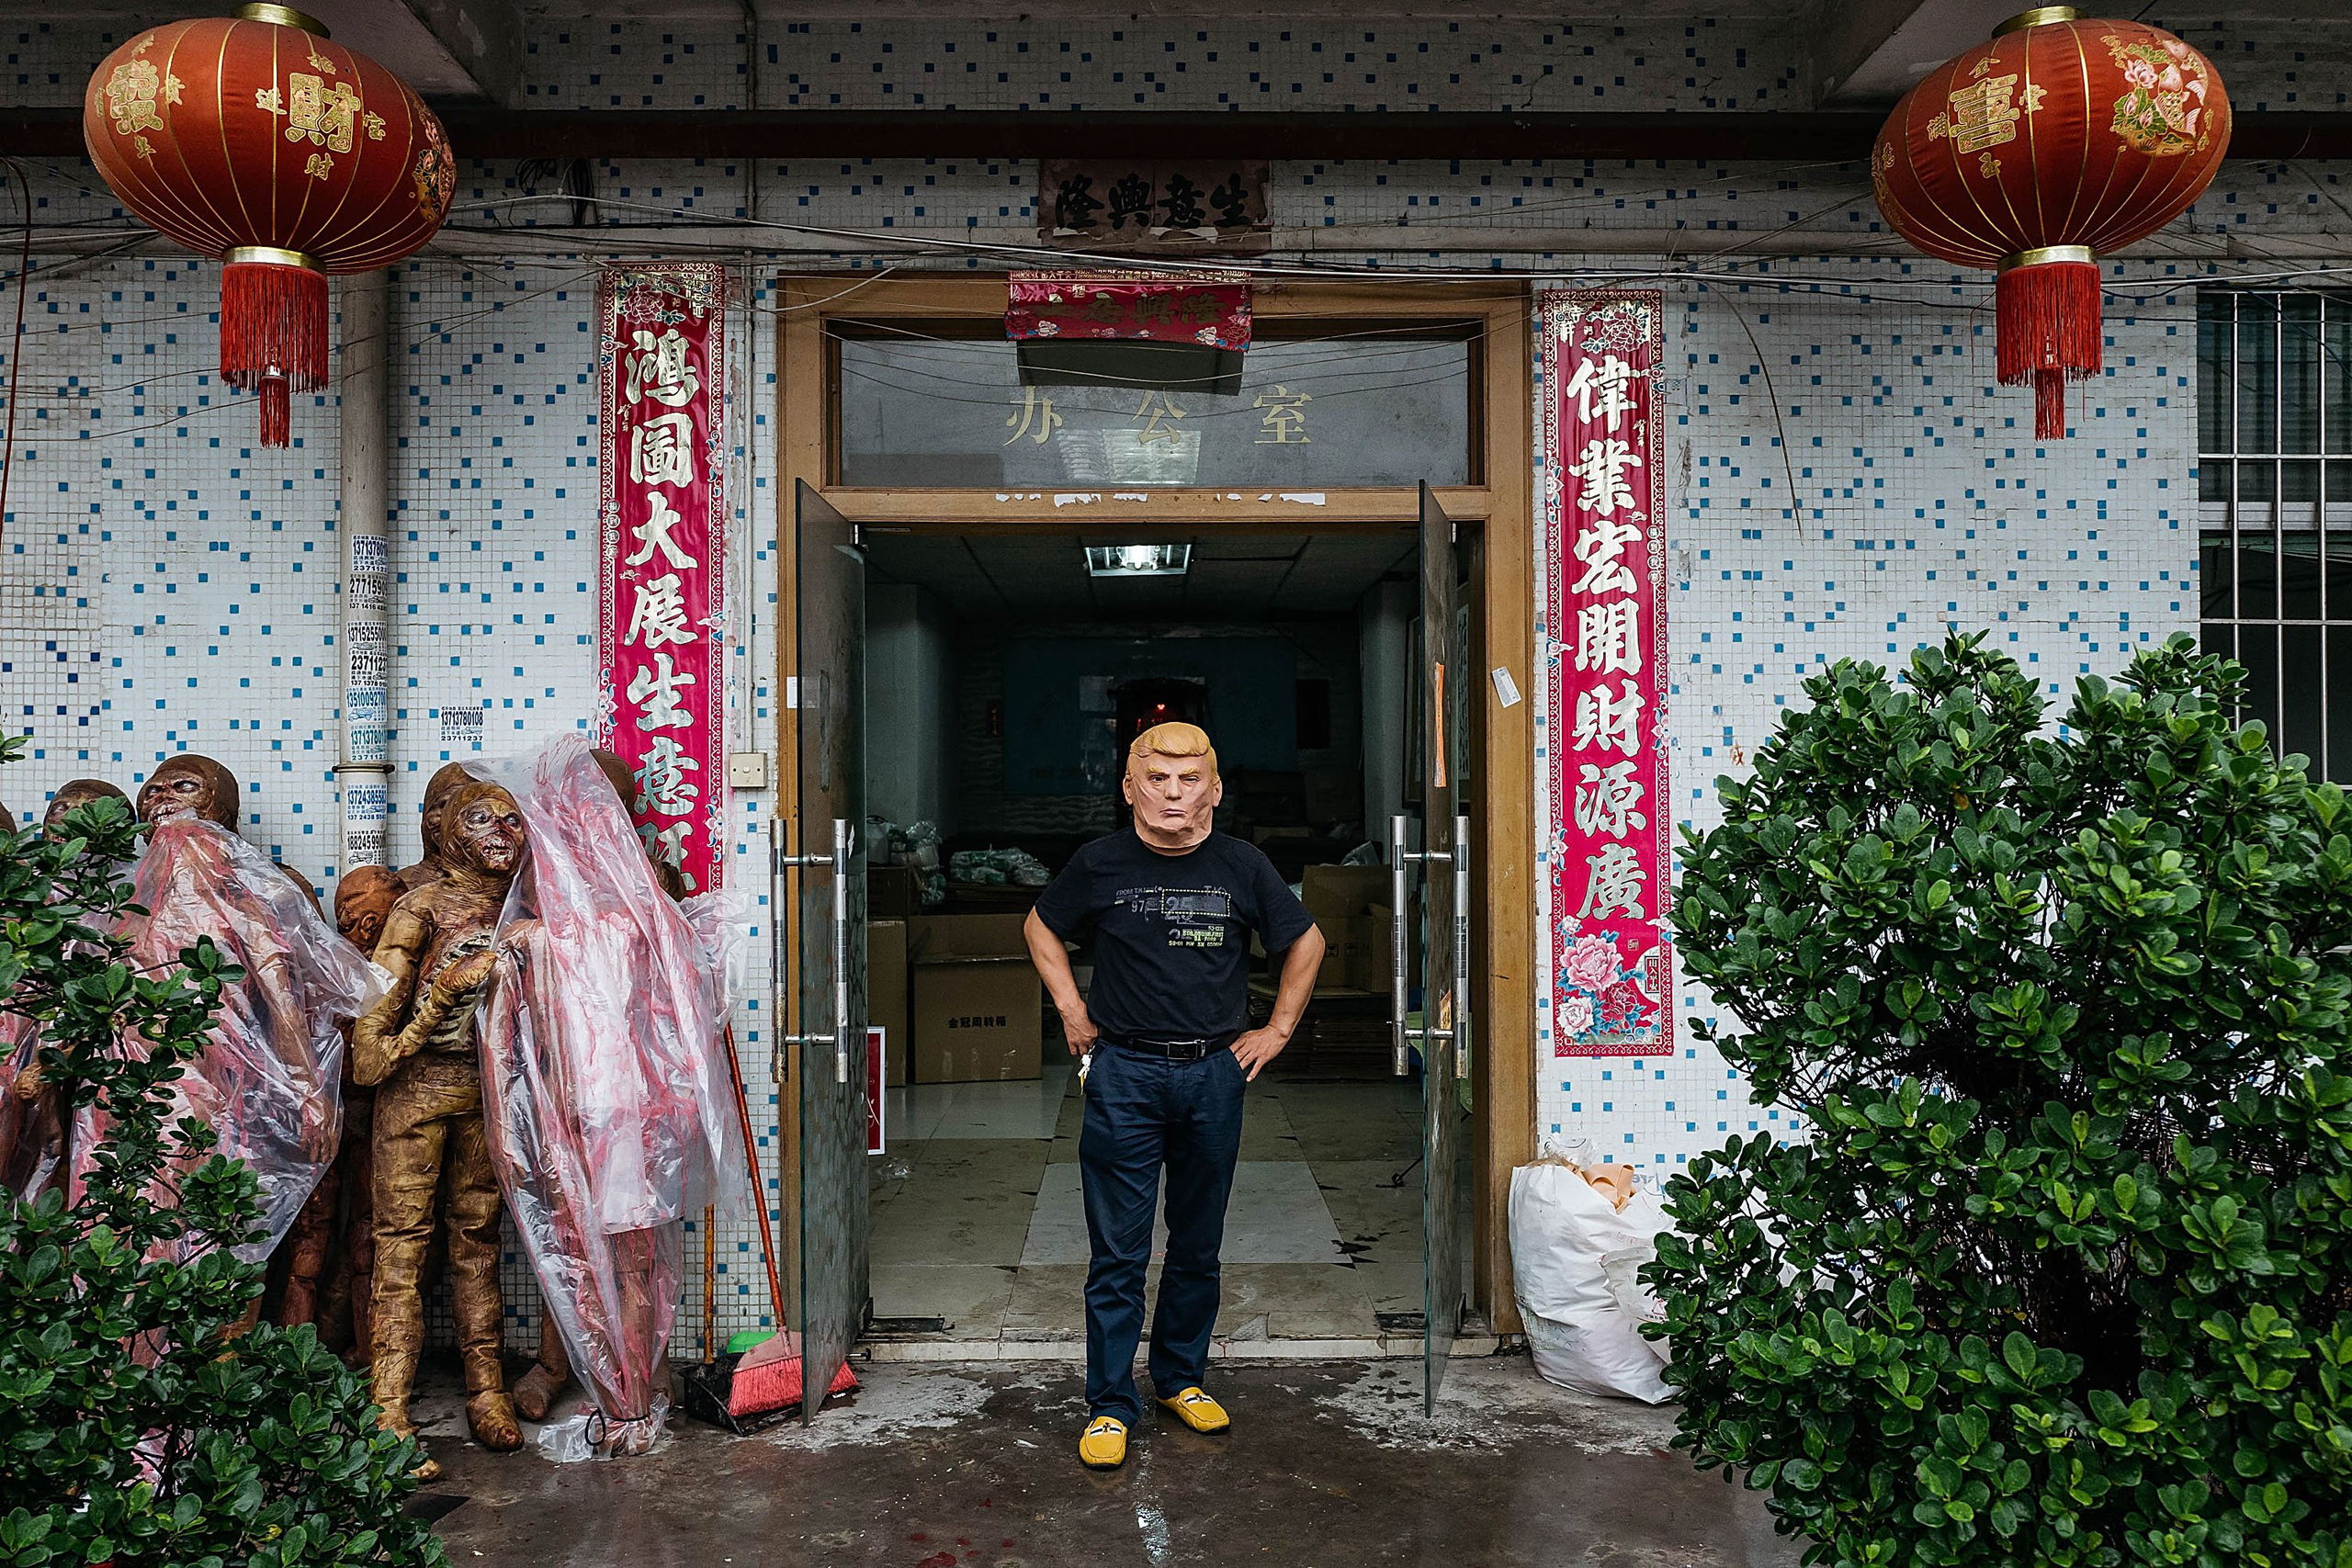 An employee wearing a mask of Donald Trump poses for a photograph at the Shenzhen Lanbingcai Latex Crafts Factory in Shenzhen, China, on Oct. 18, 2016. The factory runs a small scale production of Donald Trump masks for local distribution within mainland China.